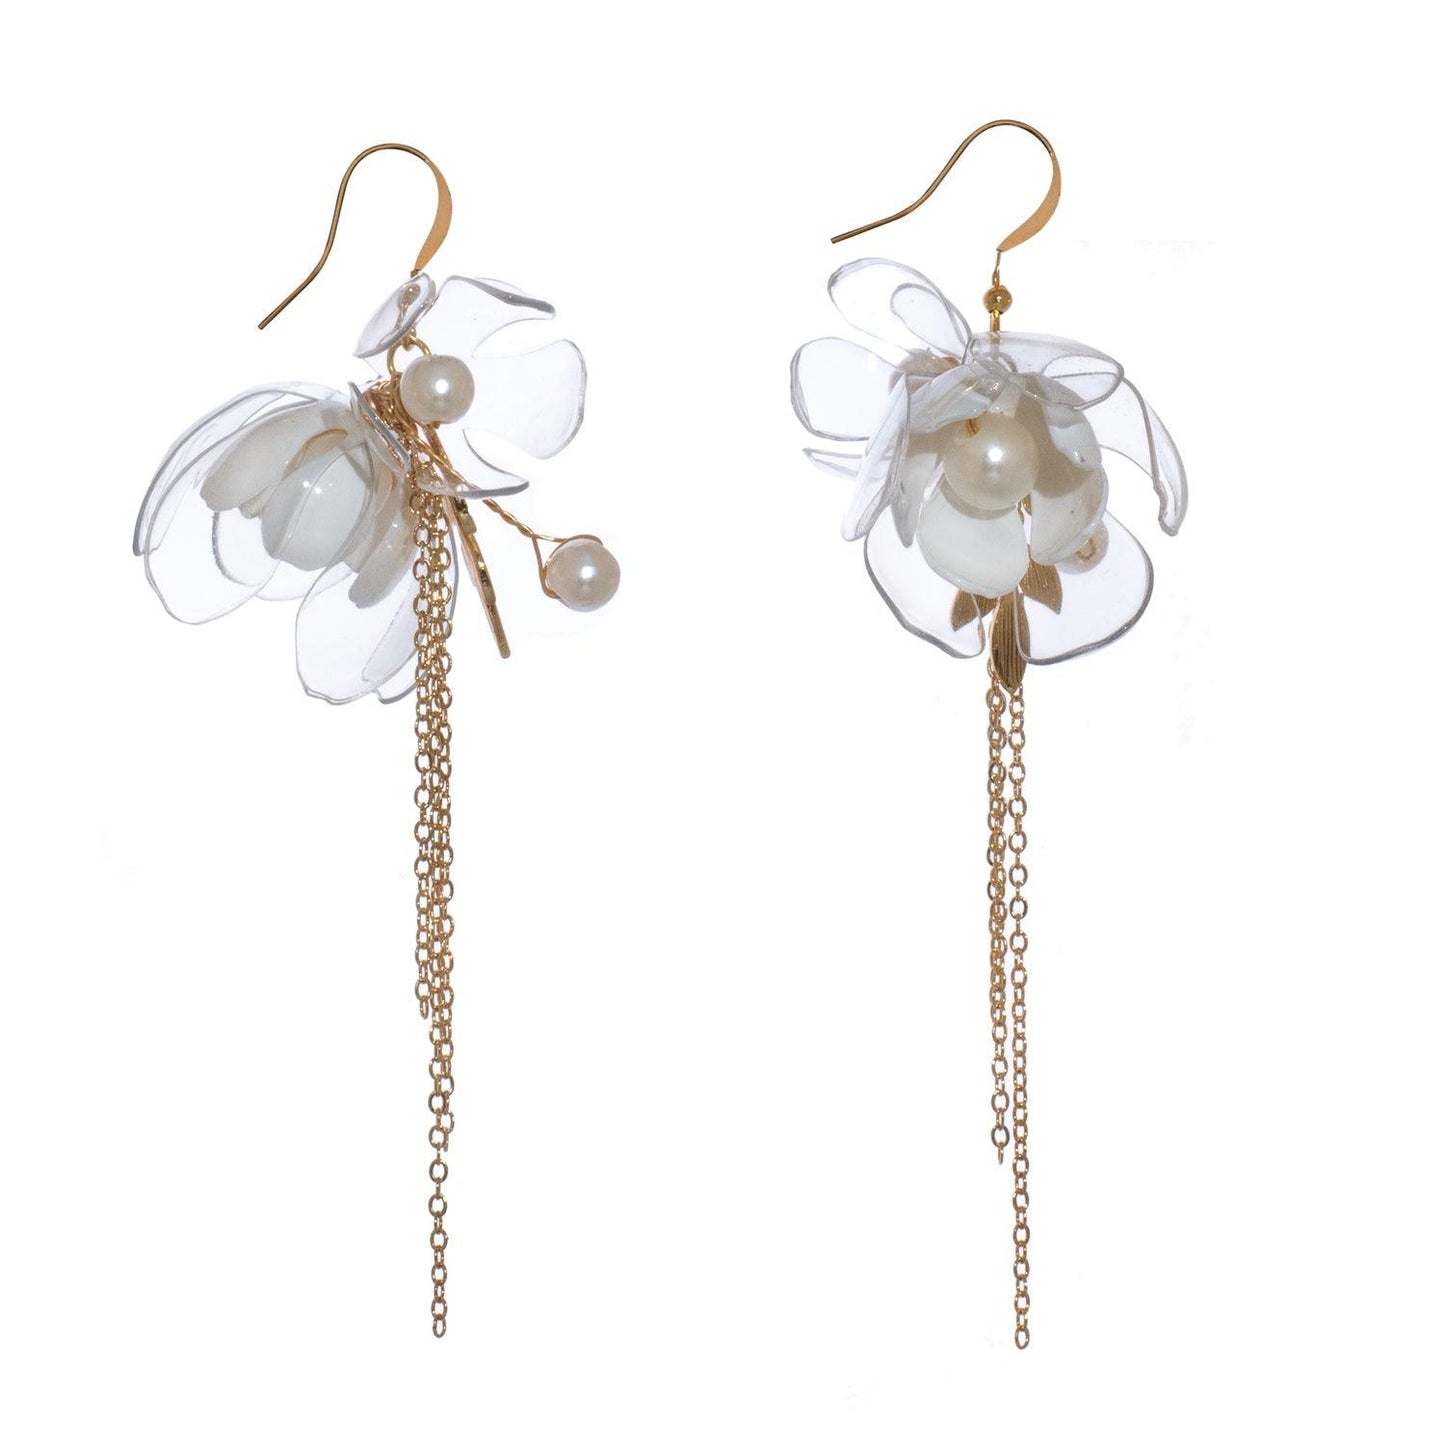 Elegant Triple Jasmine Drop Earrings - Designed by Upcycle with Jing Available to Buy at a Discounted Price on Moon Behind The Hill Online Designer Discount Store